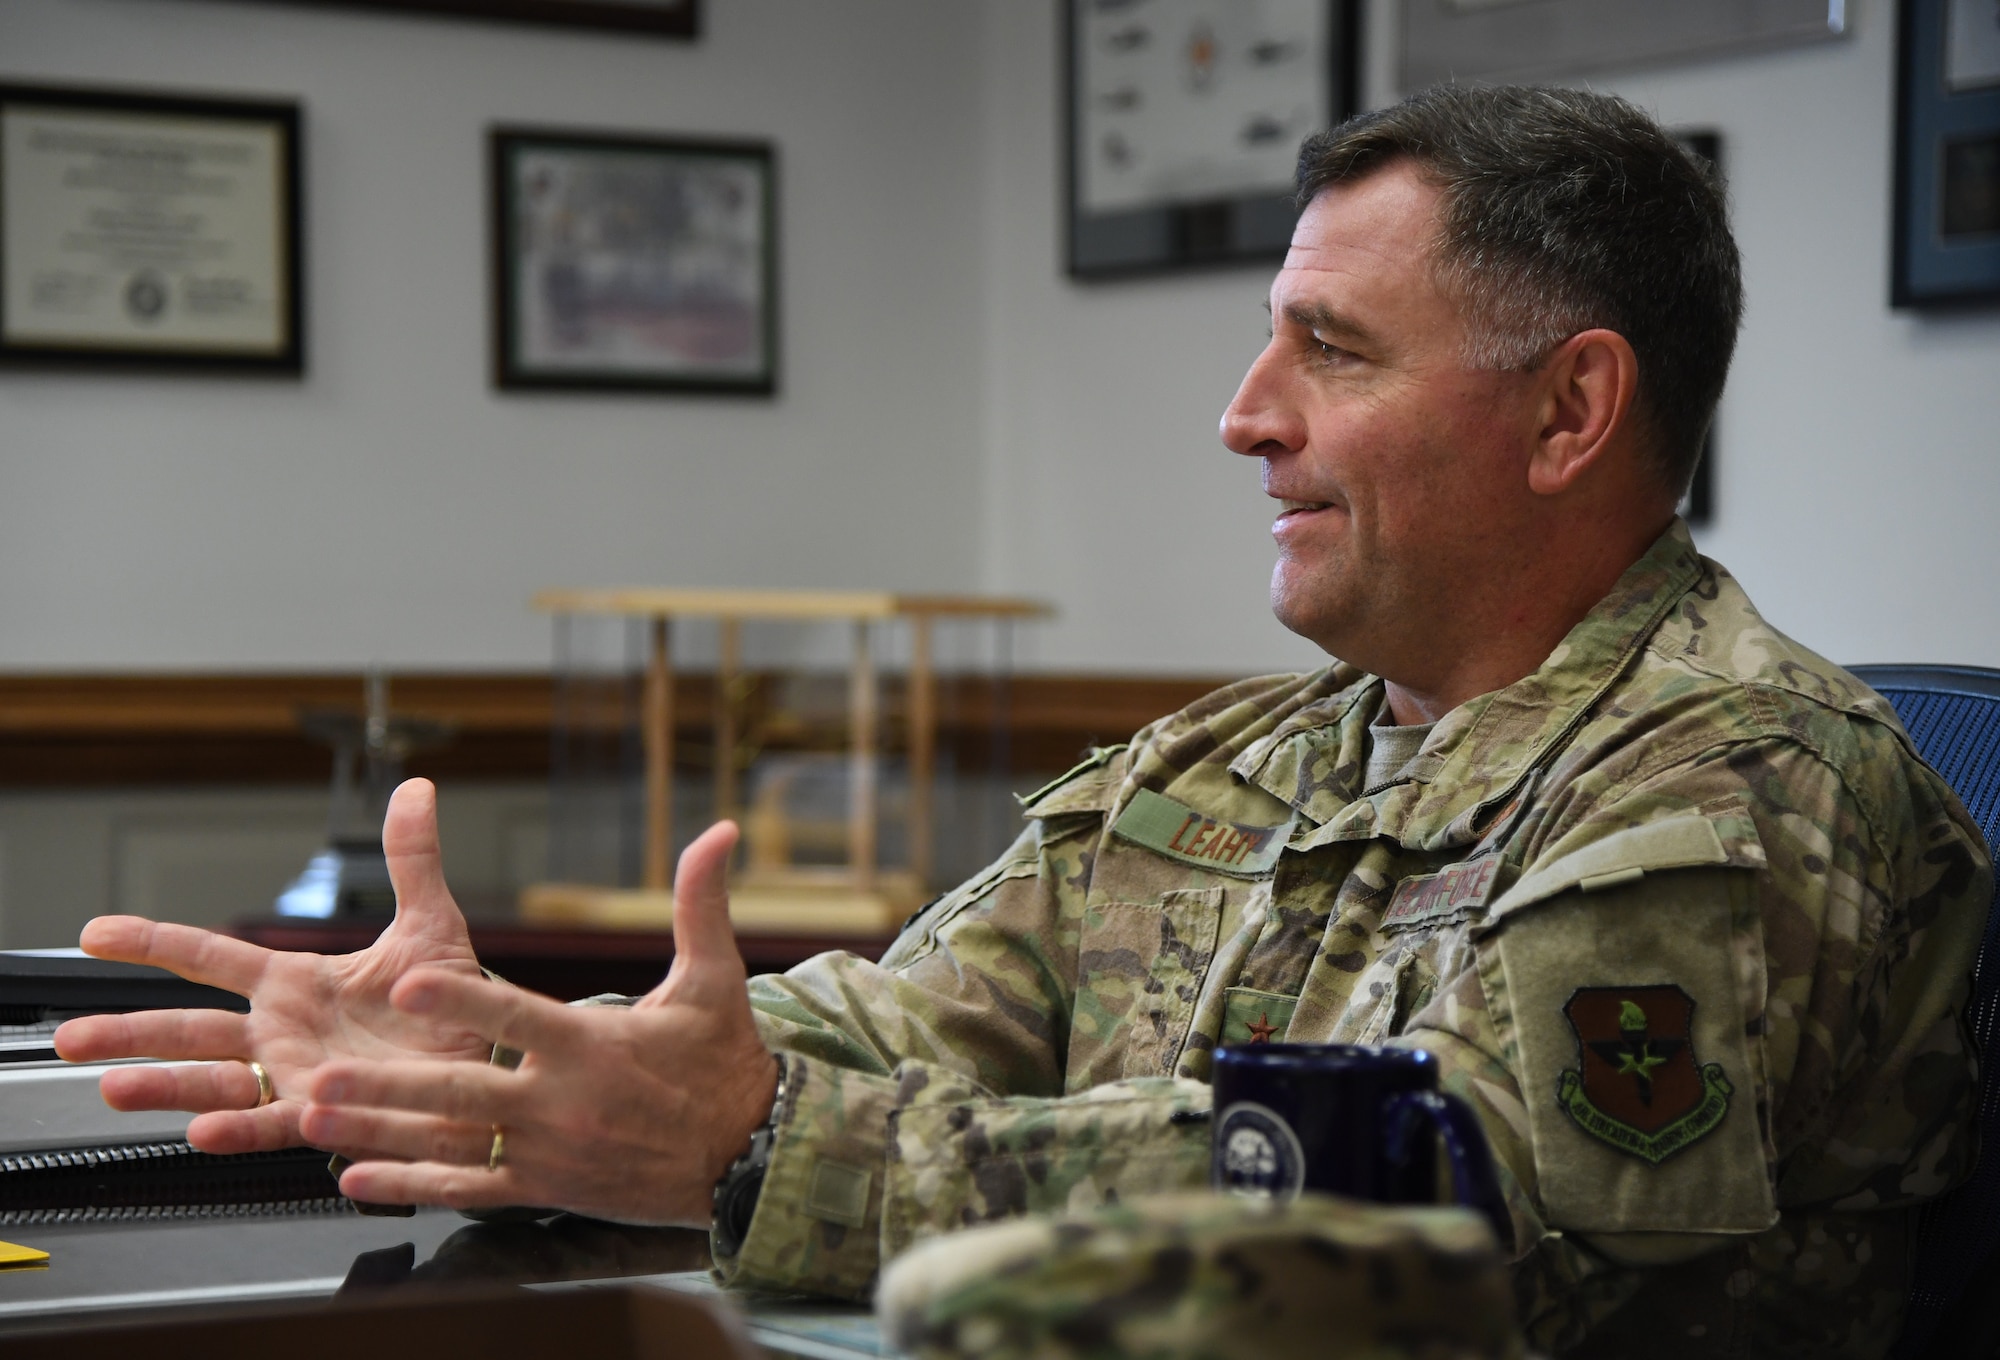 U.S. Air Force Maj. Gen. Timothy Leahy, Second Air Force commander, delivers remarks during an interview inside his office on Keesler Air Force Base, Mississippi, Aug. 14, 2019. Leahy will retire on Dec. 1 with more than 34 years of military service. Throughout his career, Leahy held positions at the major command, sub-unified combatant command and geographic and functional combatant command levels. He also commanded at the squadron, wing, center and numbered Air Force level. Additionally, Leahy is a command pilot with more than 3,200 hours of flight time, primarily in Special Operations Forces aircraft. (U.S. Air Force photo by Kemberly Groue)